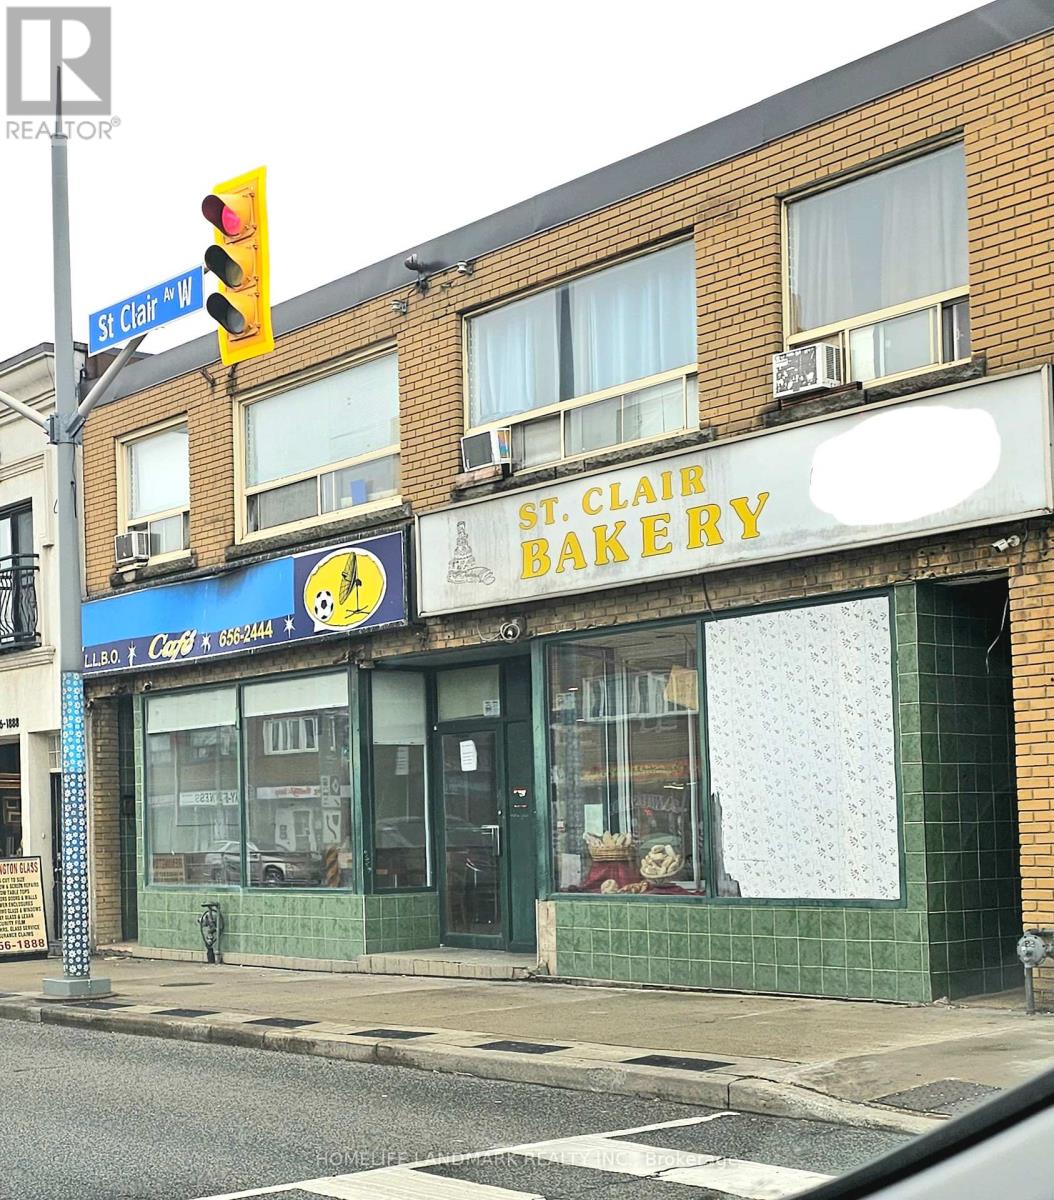 Commercial For Sale | 1656 58 St Clair Ave W | Toronto | M6N1H8